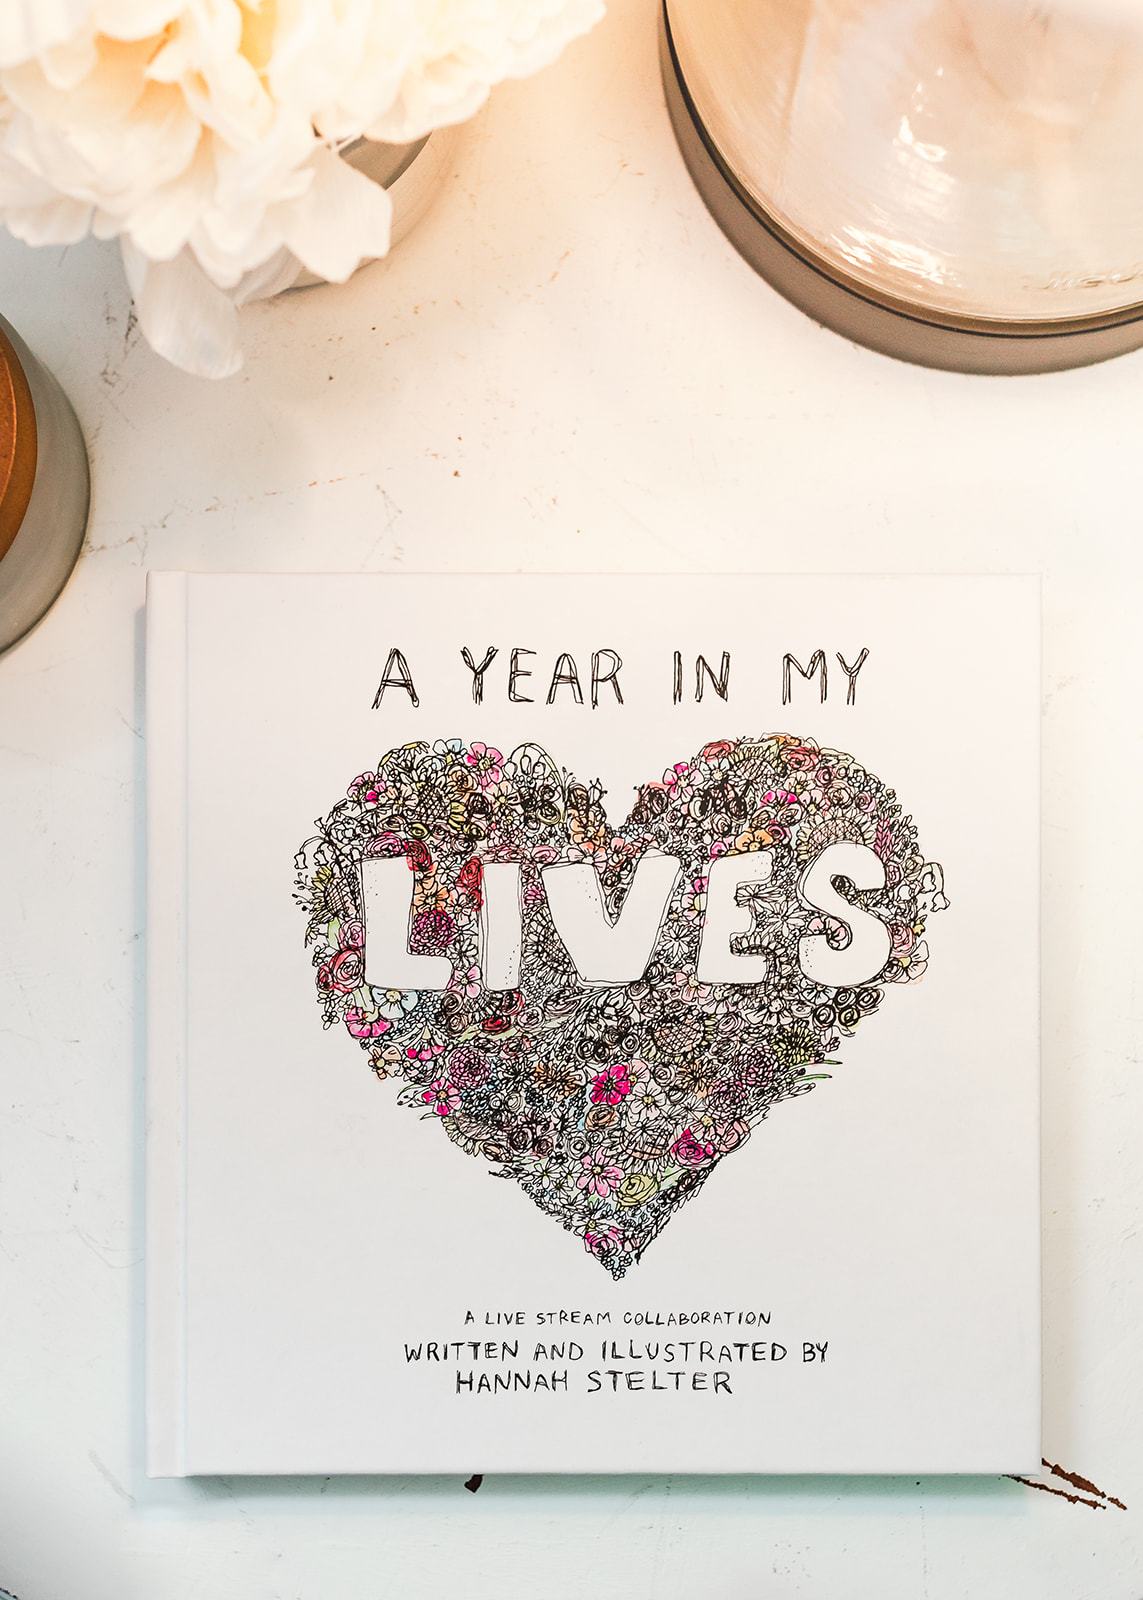 "A Year in My LIVES" Art Book